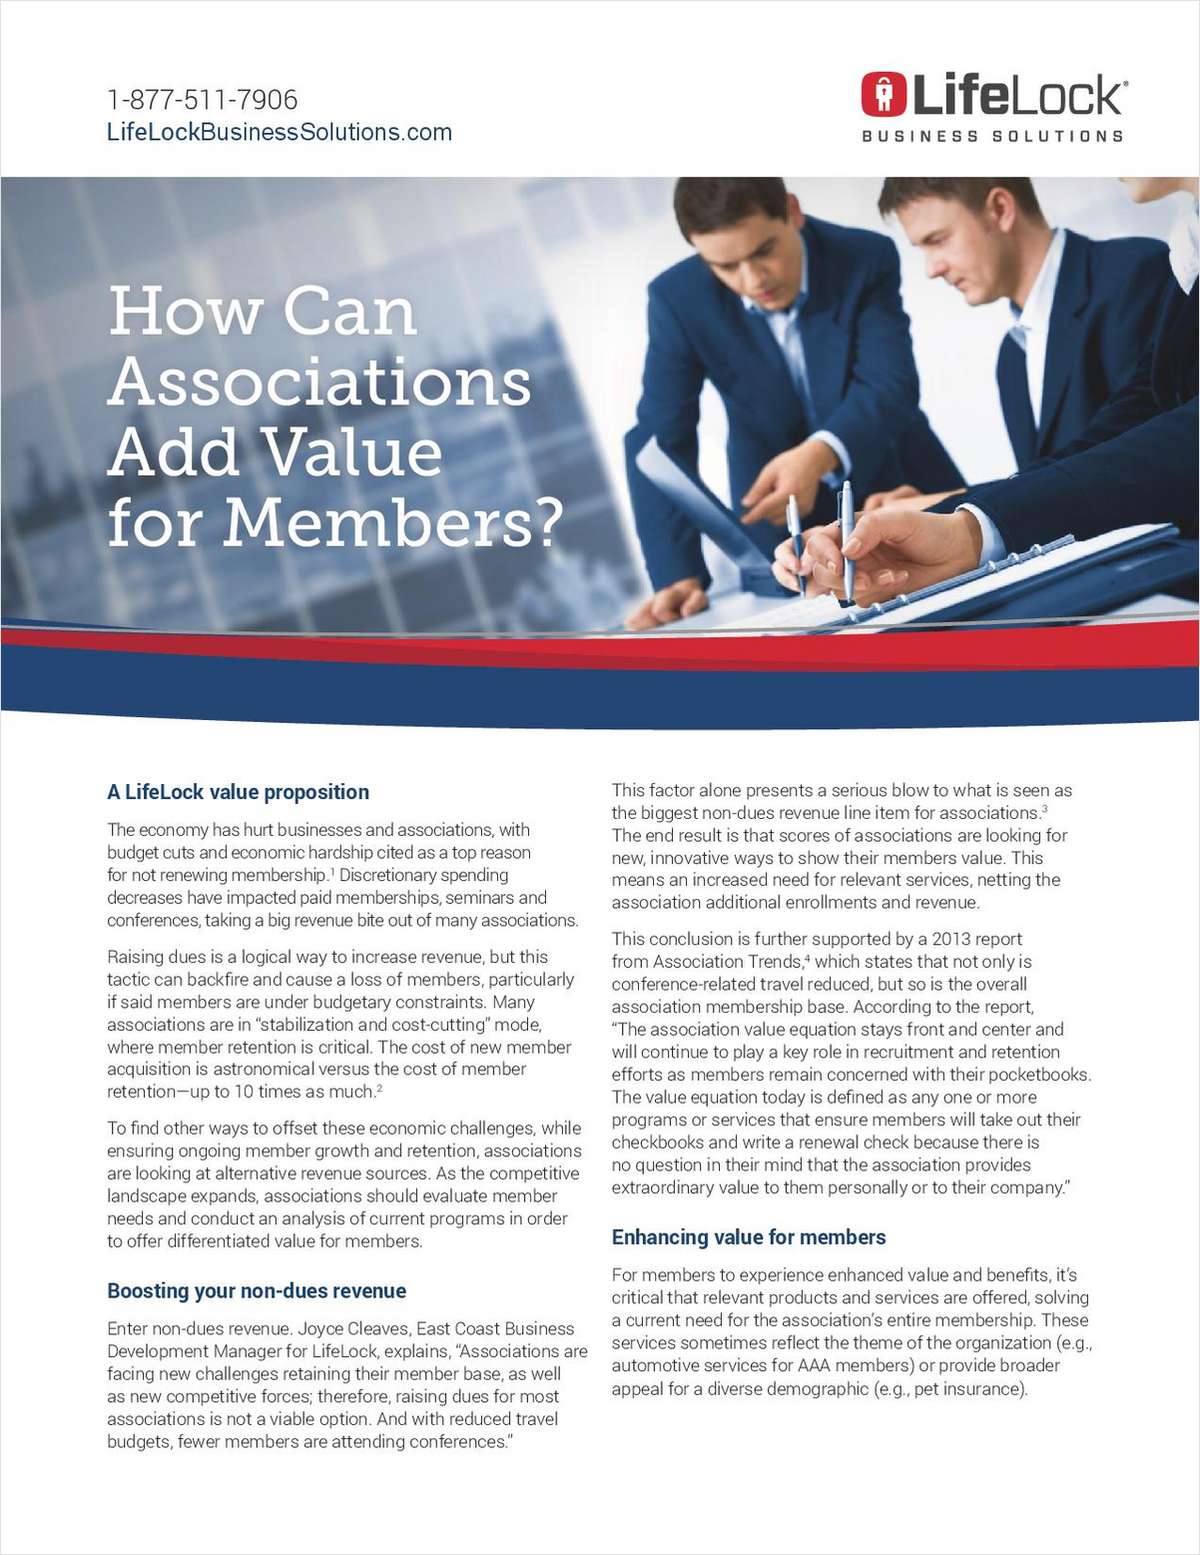 Find Out How Associations Can Add Value for Members